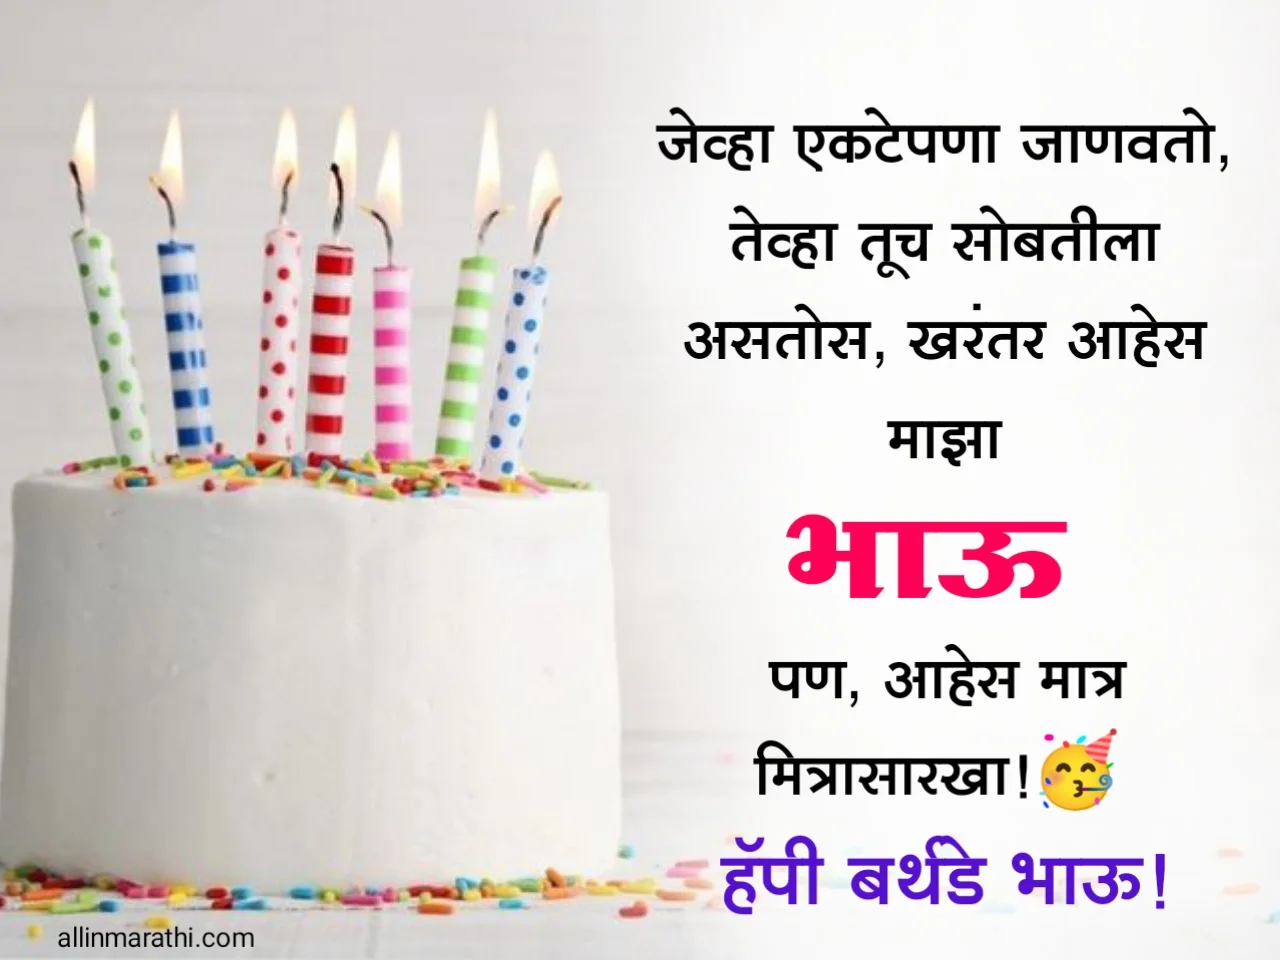 Birthday quotes for brother in marathi